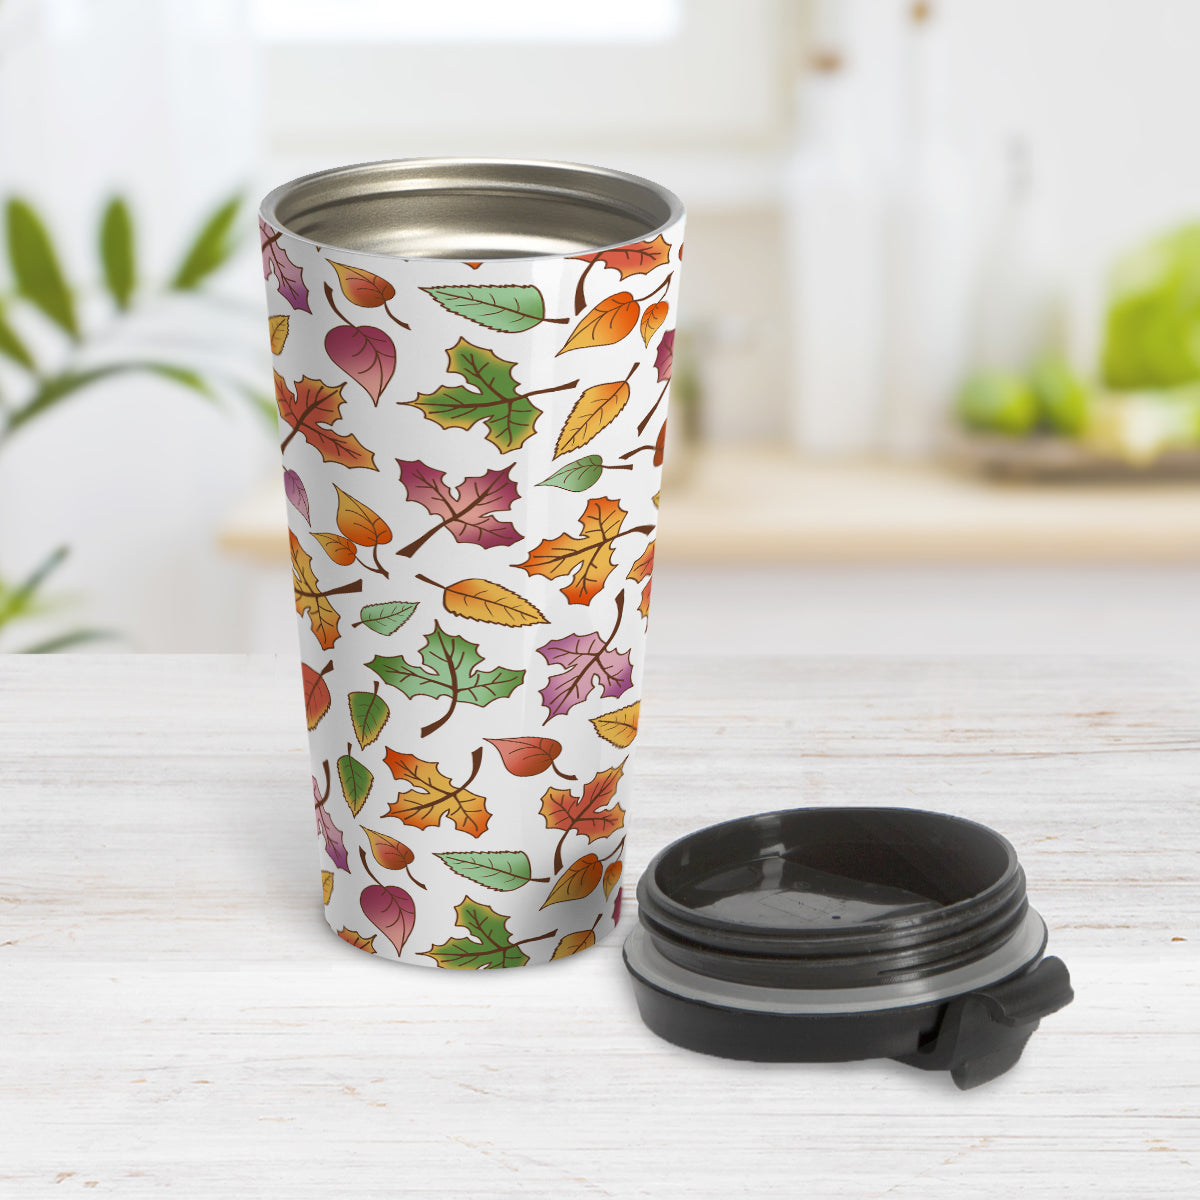 Changing Leaves Fall Travel Mug (15oz) at Amy's Coffee Mugs. A stainless steel insulated travel mug designed with a fall themed pattern of leaves changing colors, as they do at the beginning of autumn, that wraps around the travel mug. Photo shows the mug open with the lid on the table beside it.